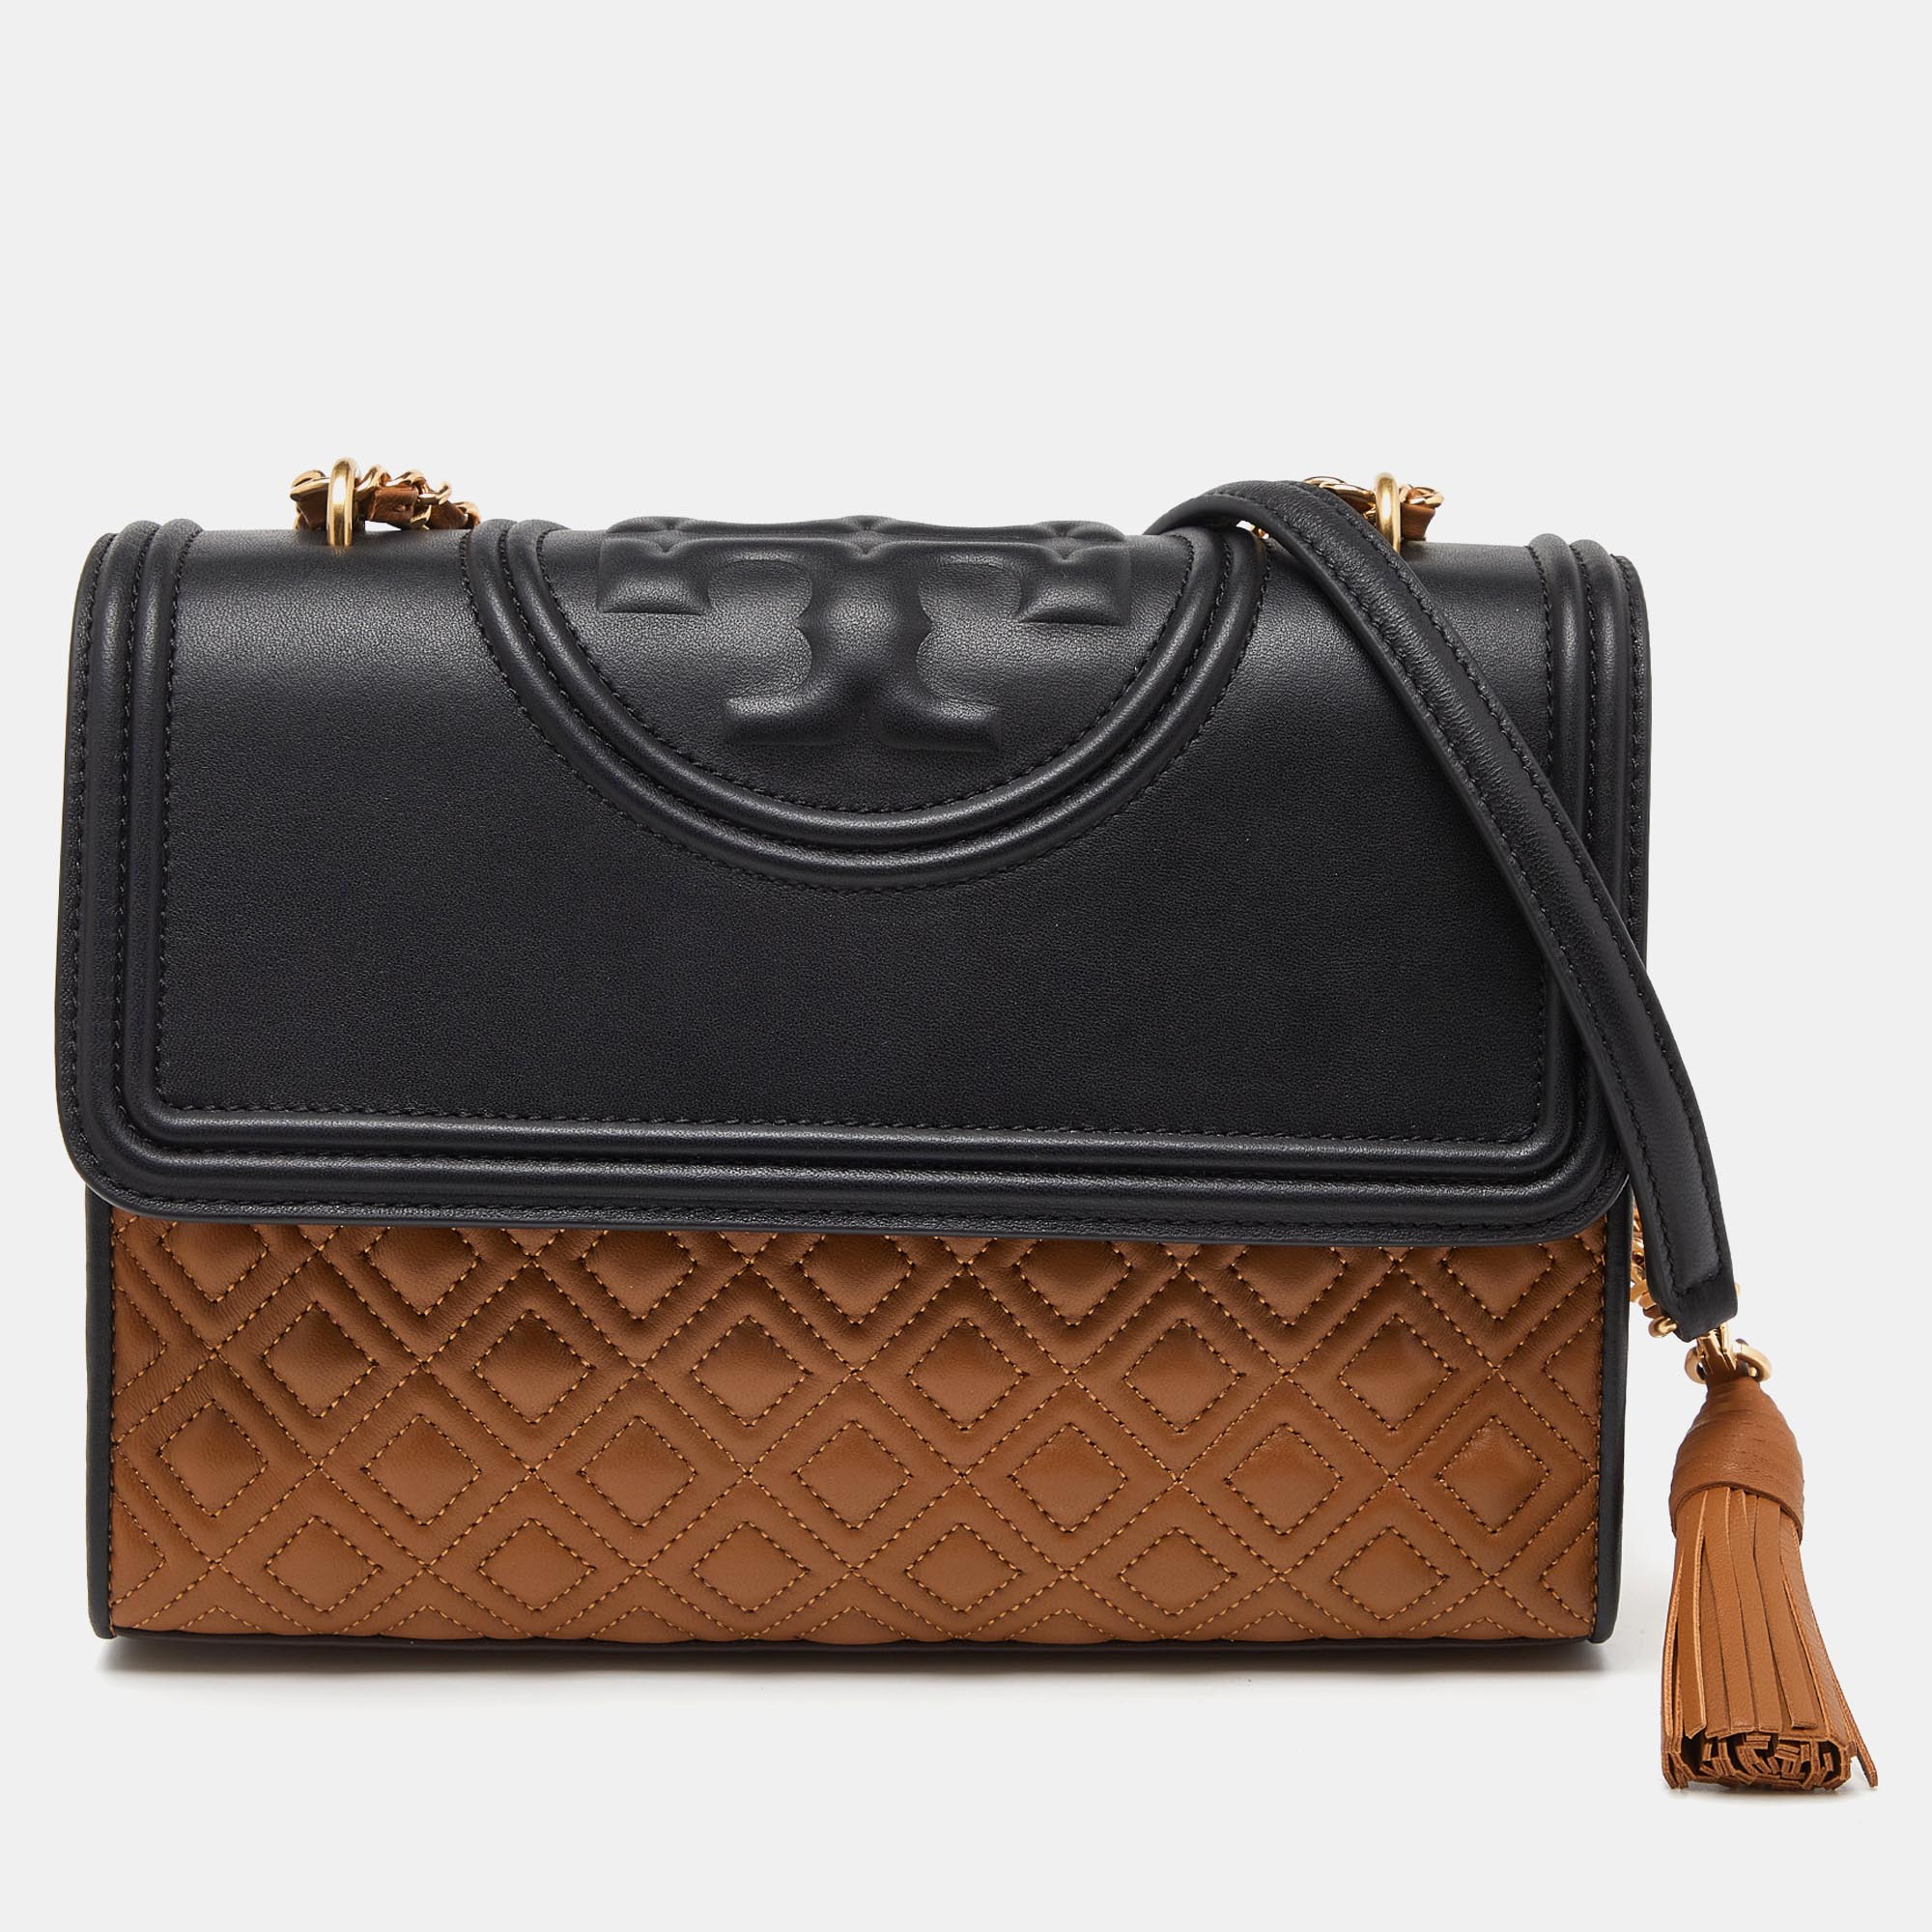 This Fleming shoulder bag from Tory Burch has been meticulously crafted from leather and designed with quilts in diamond patterns and the logo on the top. The flap opens to a fabric lined interior and the bag is held by an interwoven chain link.